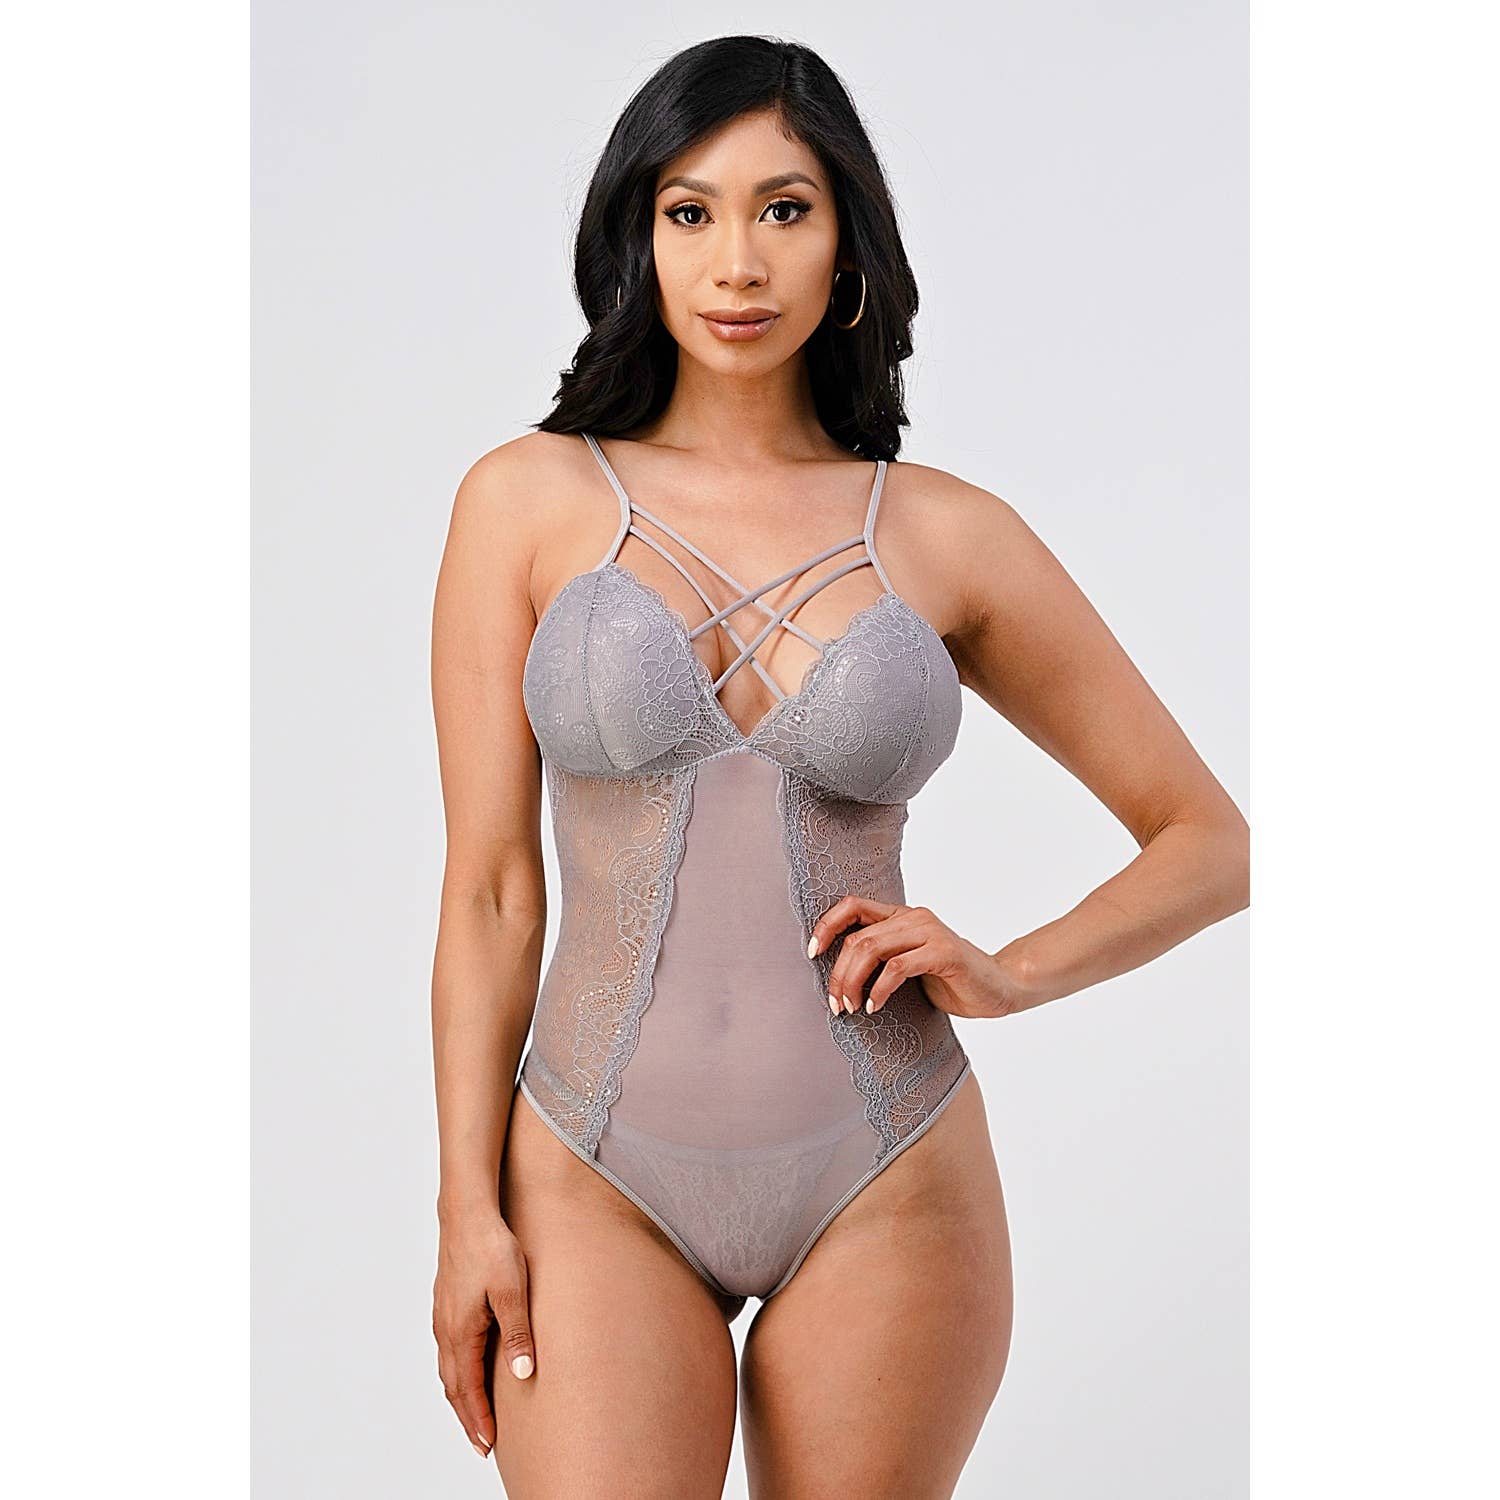 Wholesale white bodysuit lingerie For An Irresistible Look